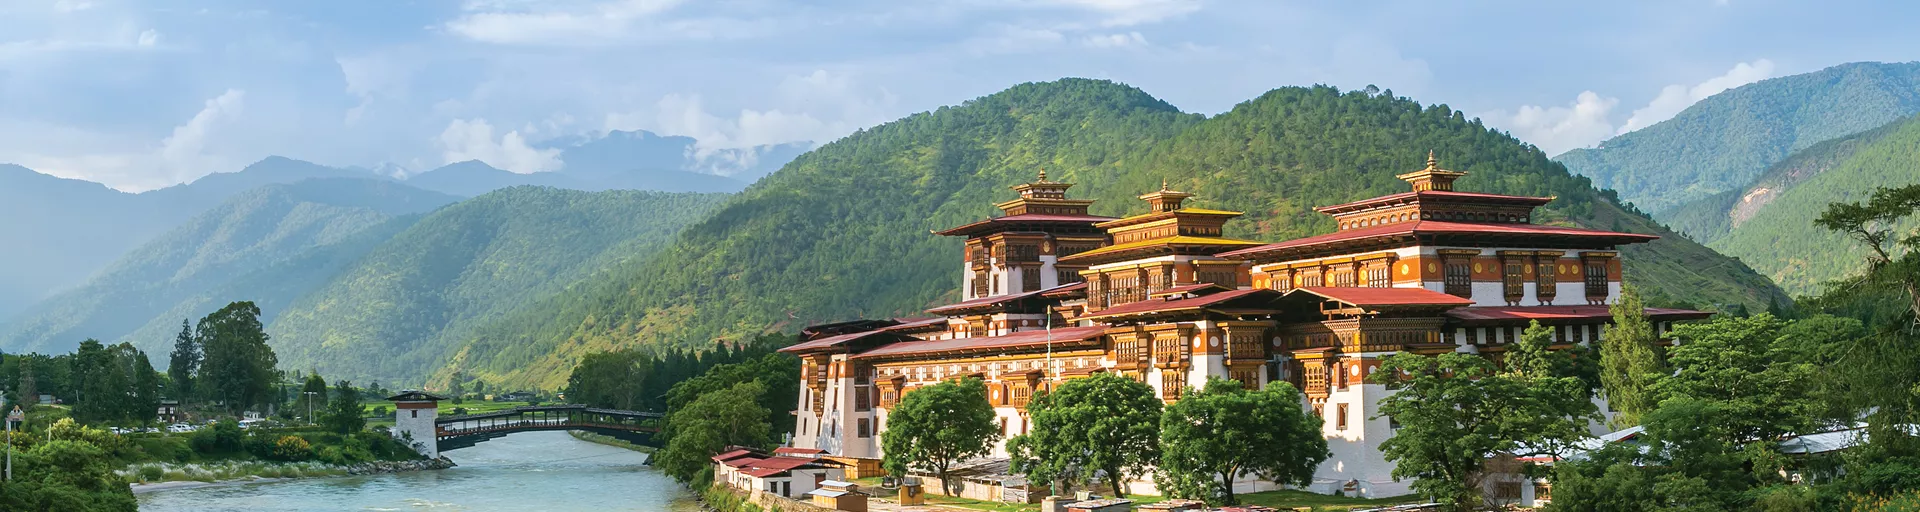 Nepal Luxury Tours Travel Guide